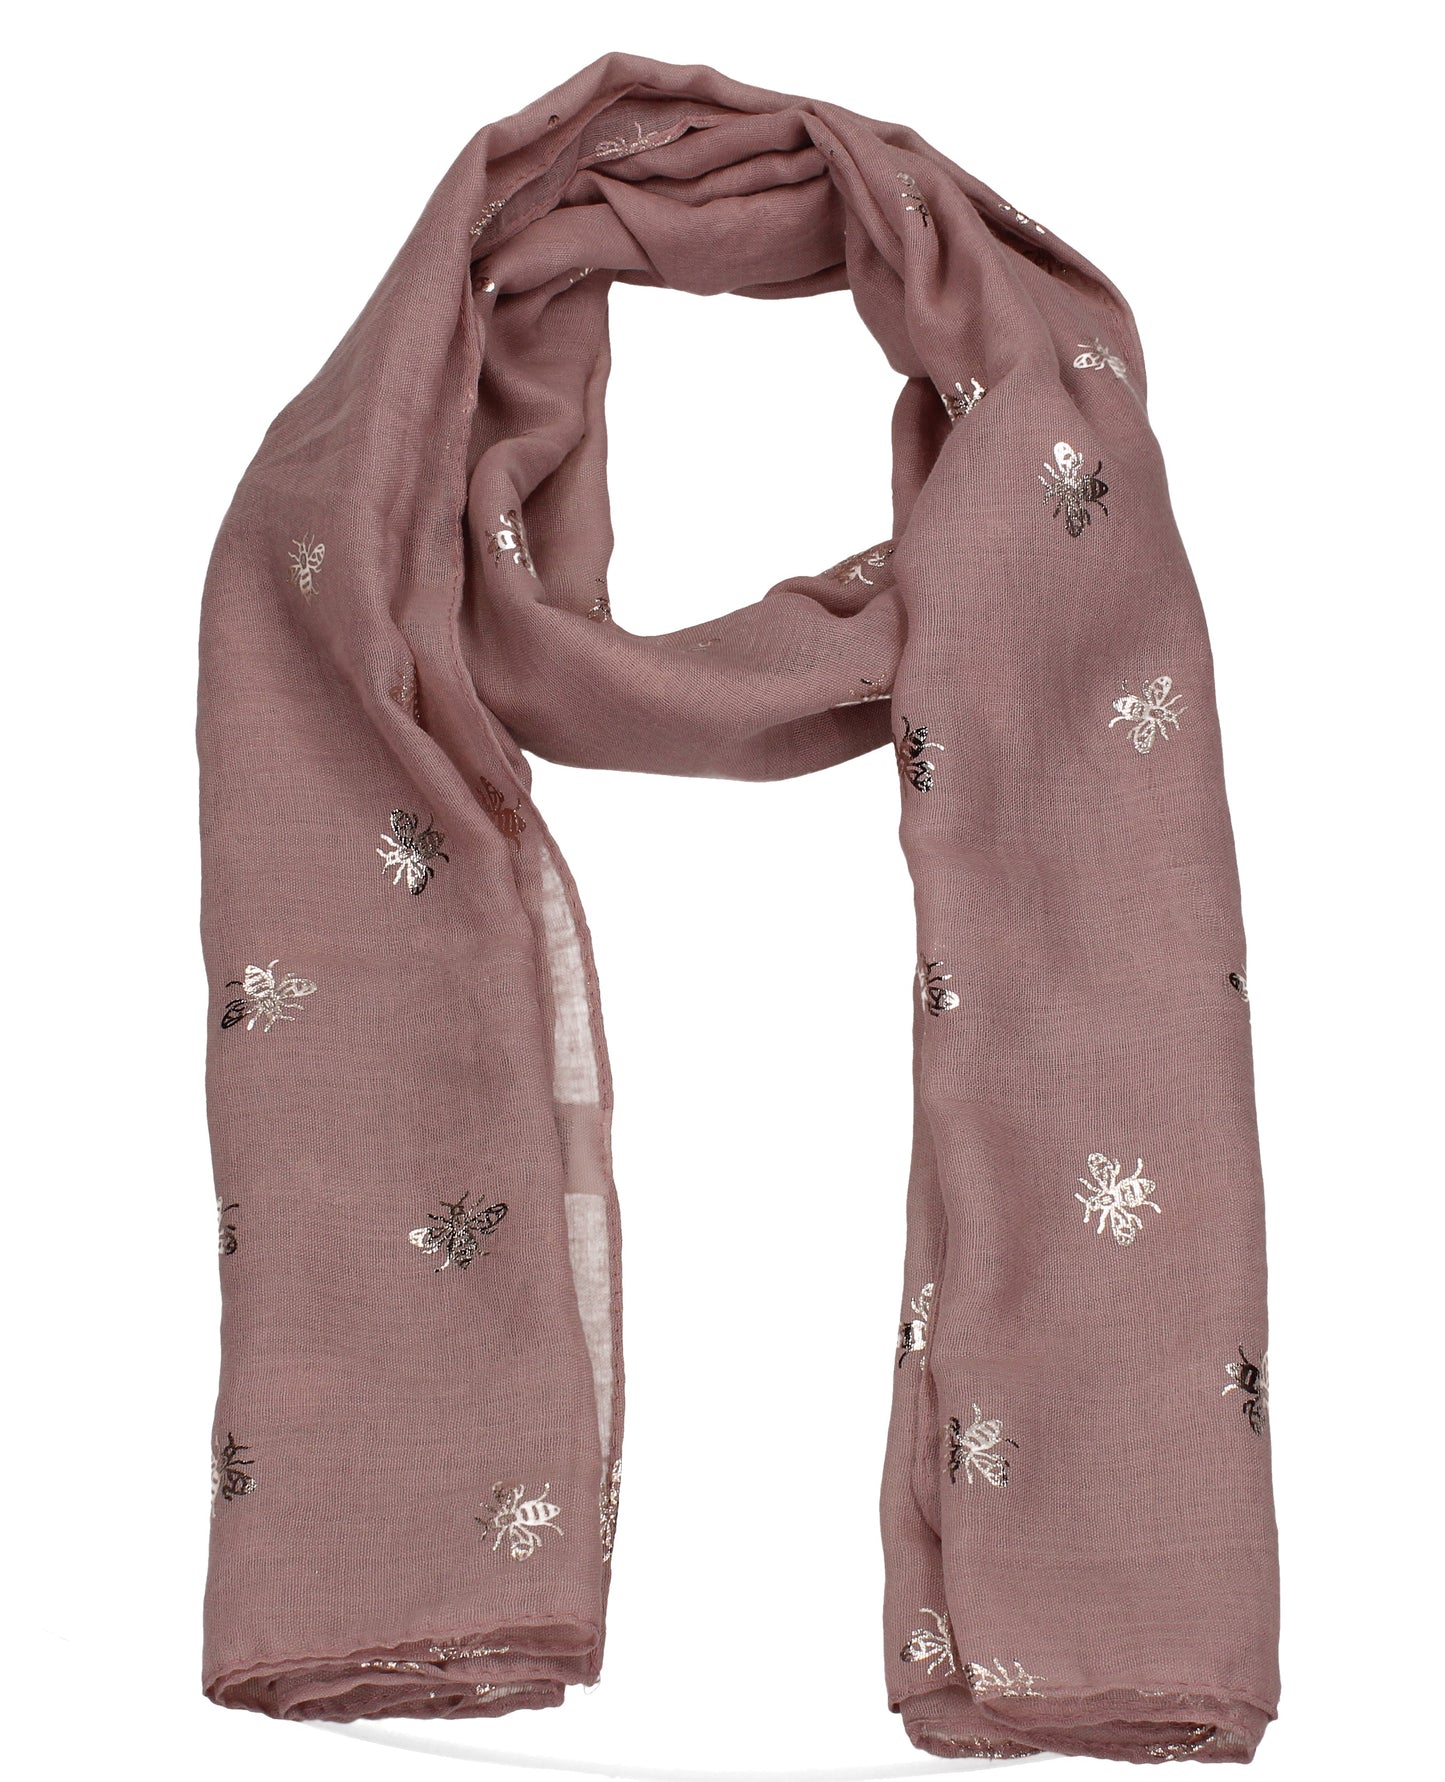 Worker Bee Gold Foil Animal Print Winter Scarf Pink